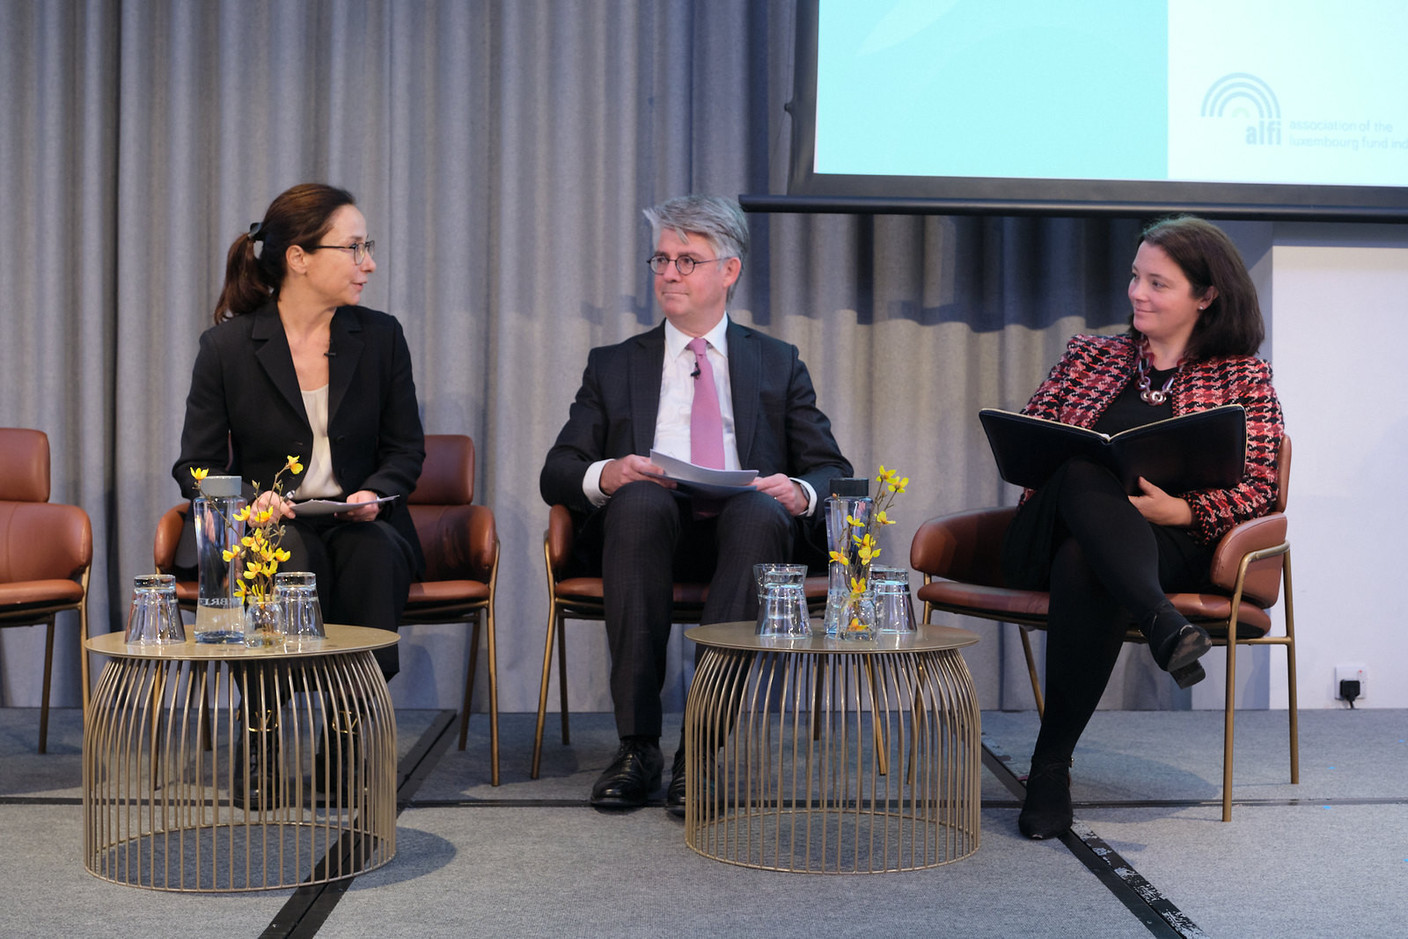 Olivia Moessner, Marco Zwick and Mhairi Jackson on the “Let’s hear from the regulators” panel at Alfi’s London conference, 19 October 2023. Photo: ALFI